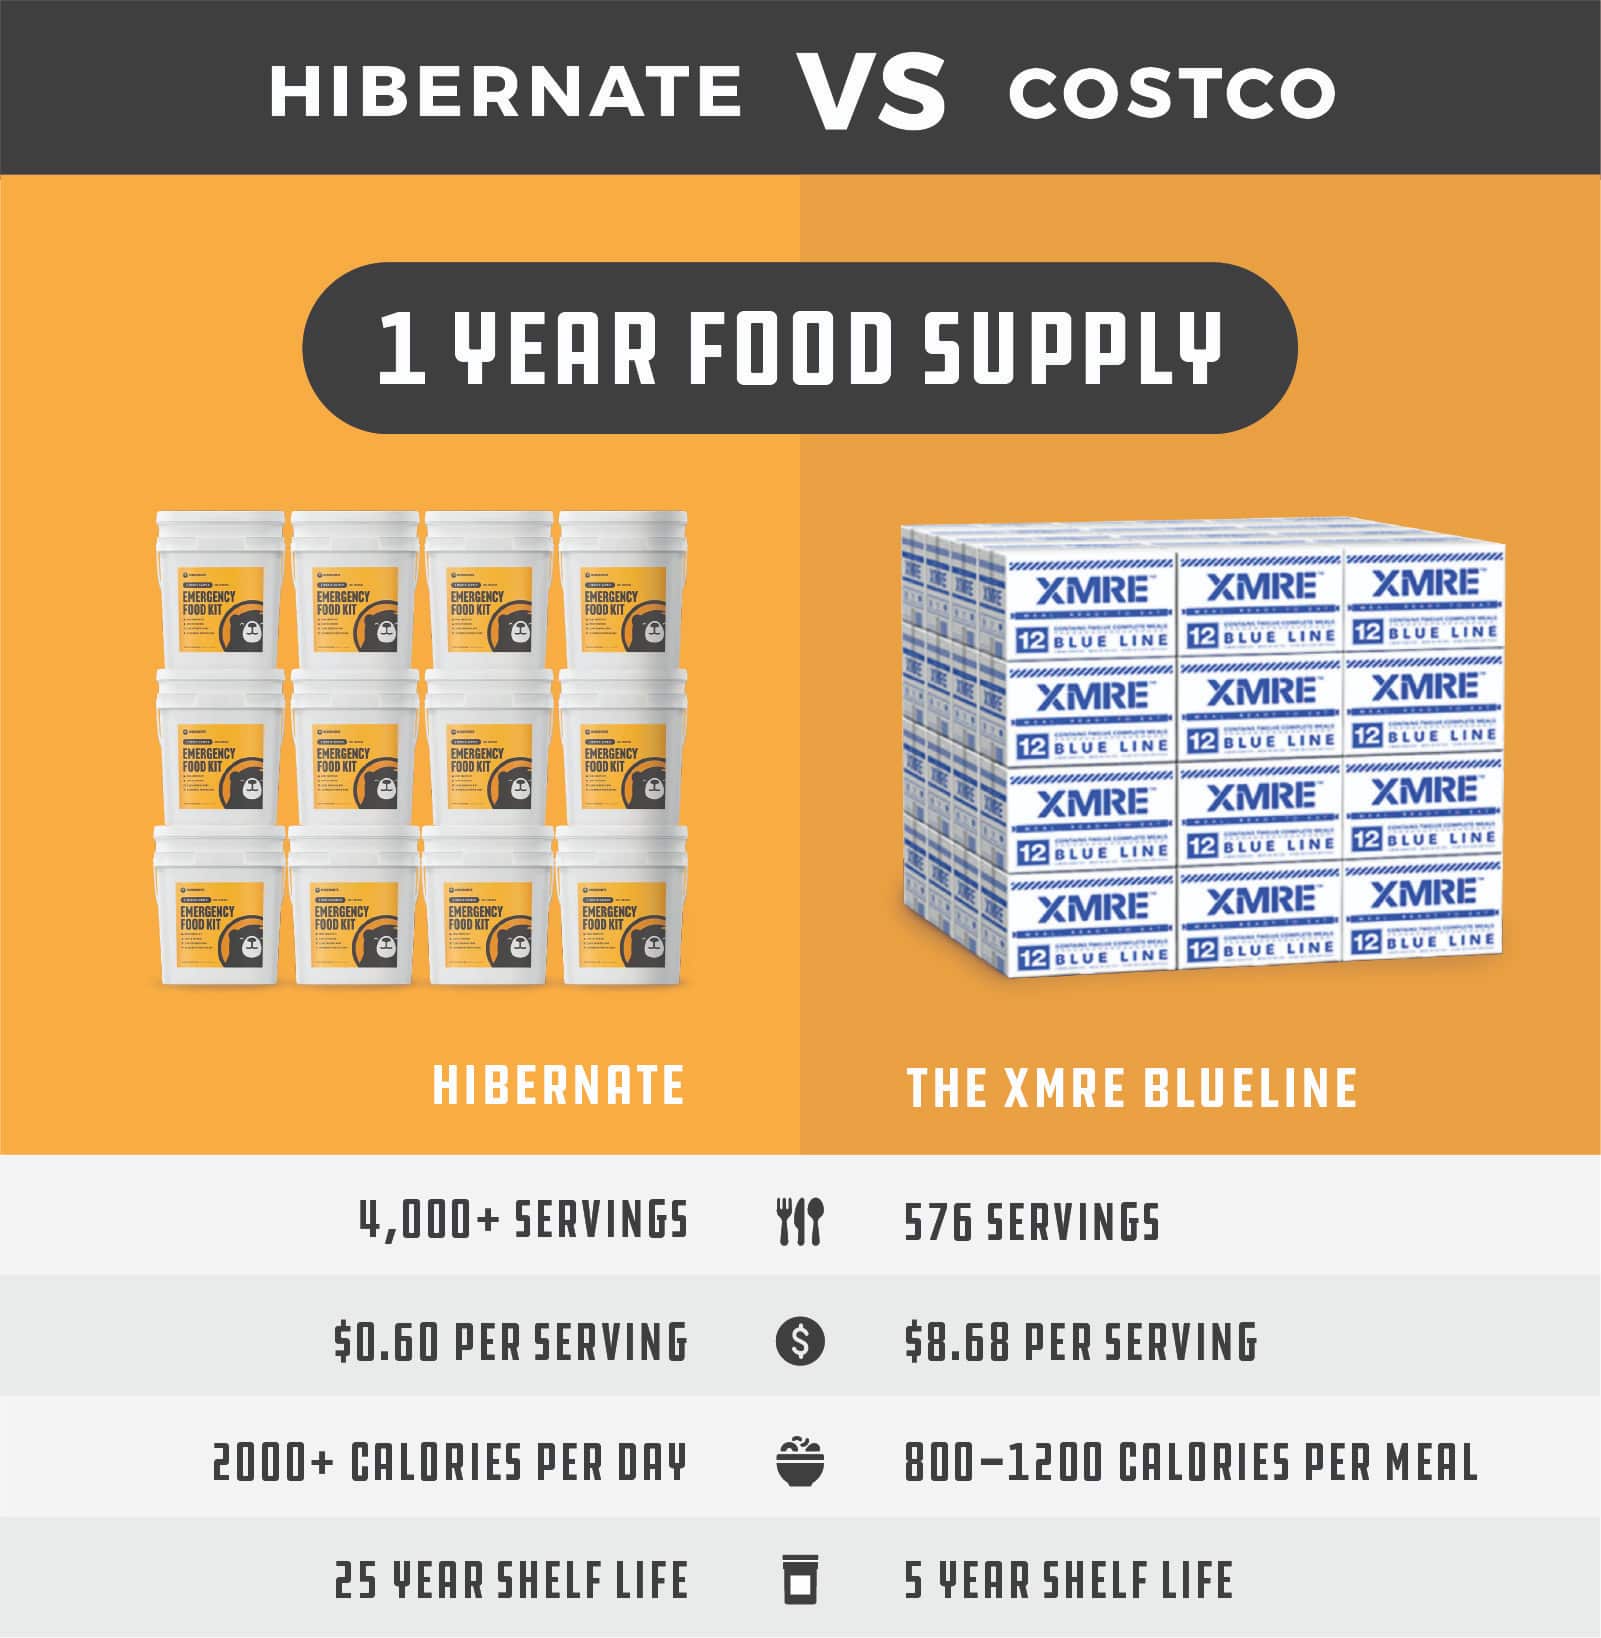 The Costco food storage option offers 576 servings of emergency food, with each meal offering between 800 and 1,200 calories. Hibernate’s 1-year food supply provides more than 4,000 servings and over 2,000 calories of nutrient-dense food allotted for each day